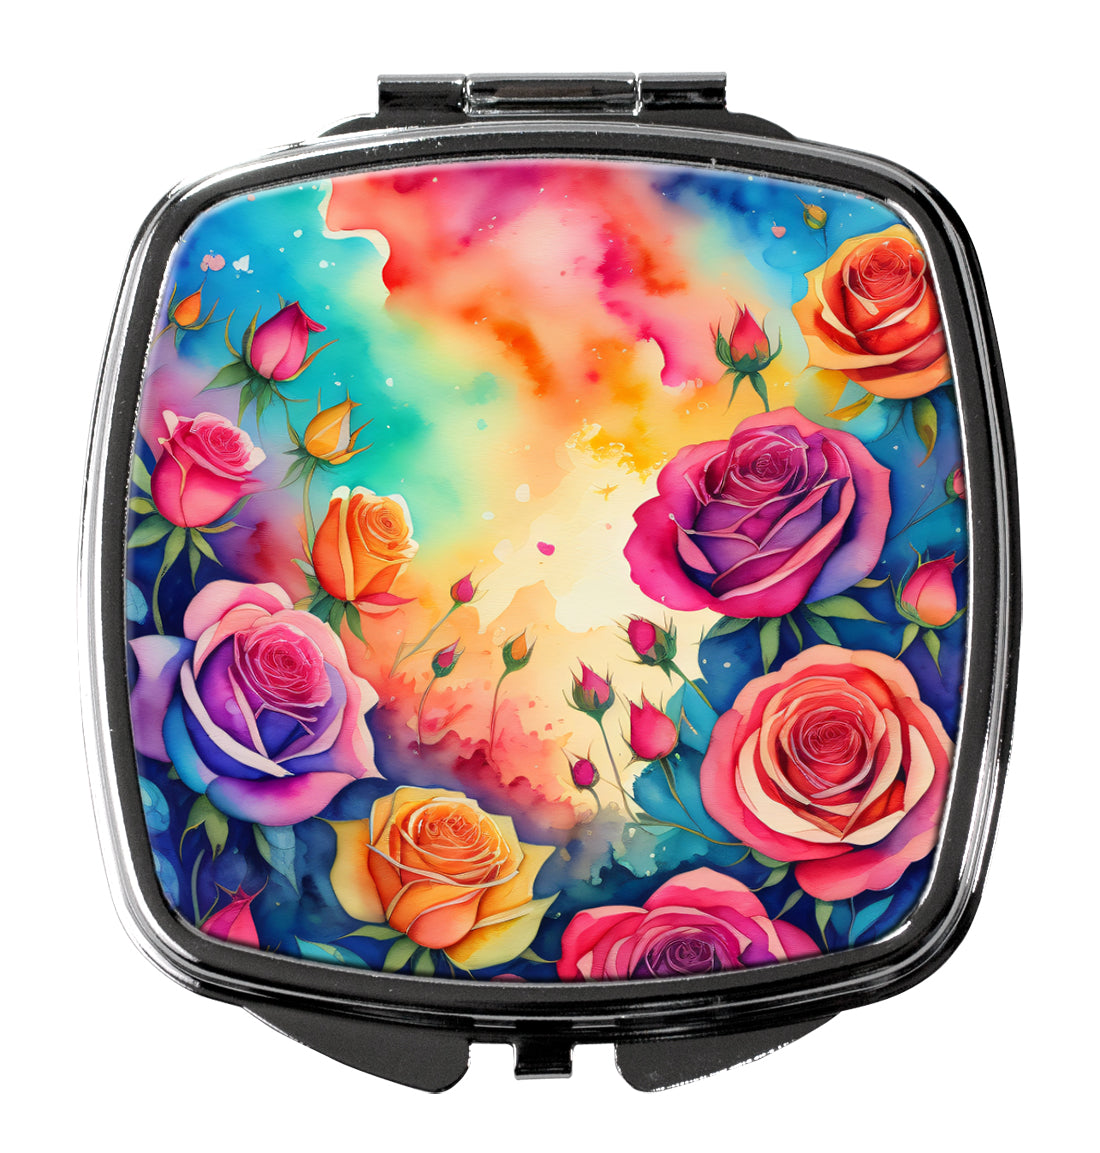 Buy this Colorful Roses Compact Mirror